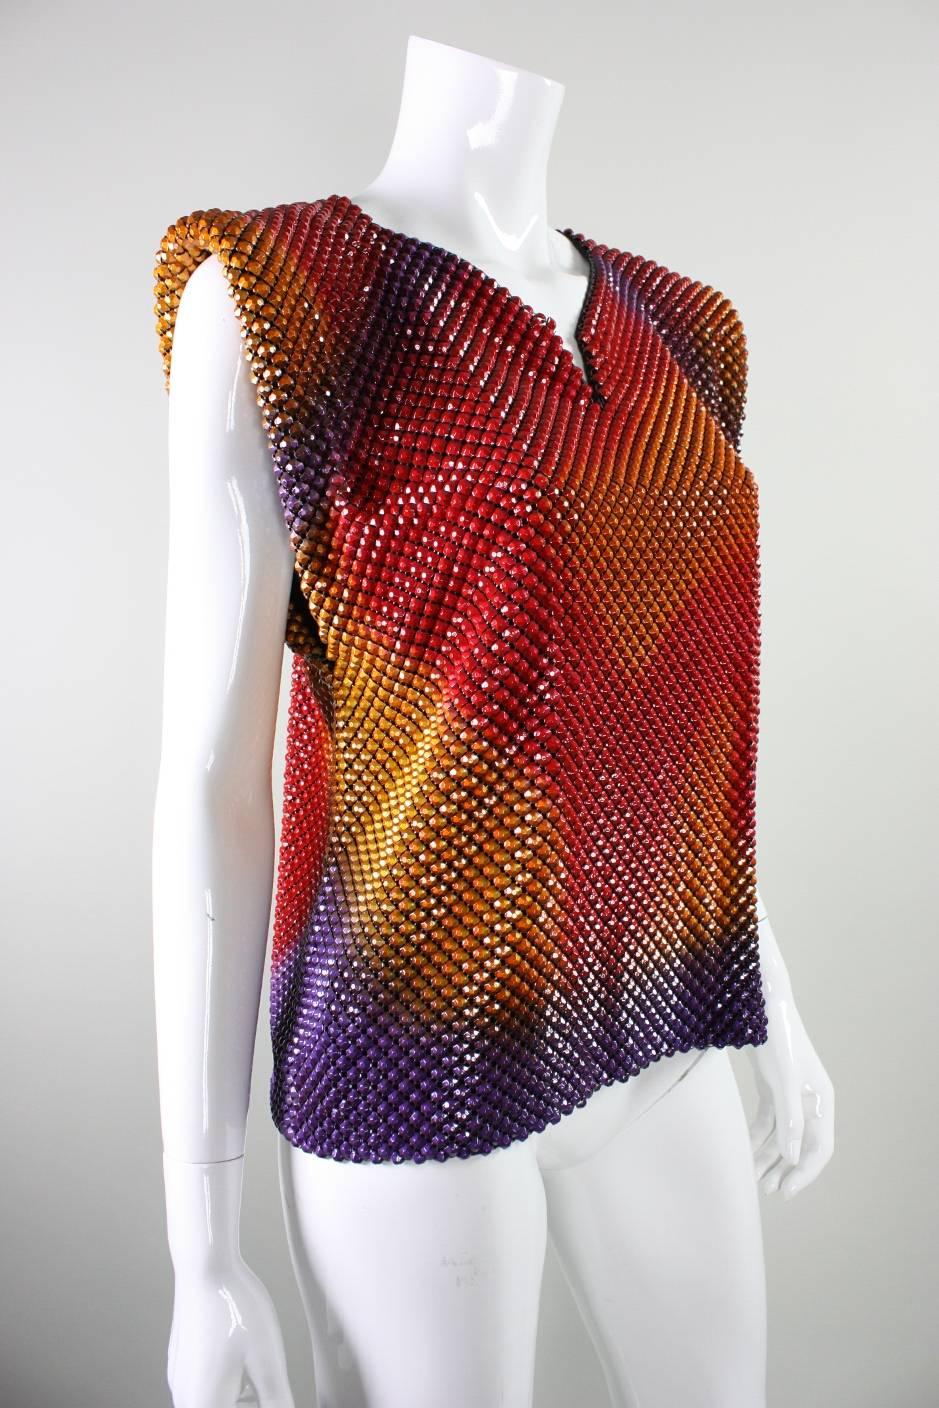 Vintage blouse from Anthony Ferrara dates to the 1980's and is made of three-dimensional metal mesh.  Mesh appears to be airbrushed in a multitude of colors ranging from red to orange to yellow to purple.  Fully lined.  No closures.

Labeled a size